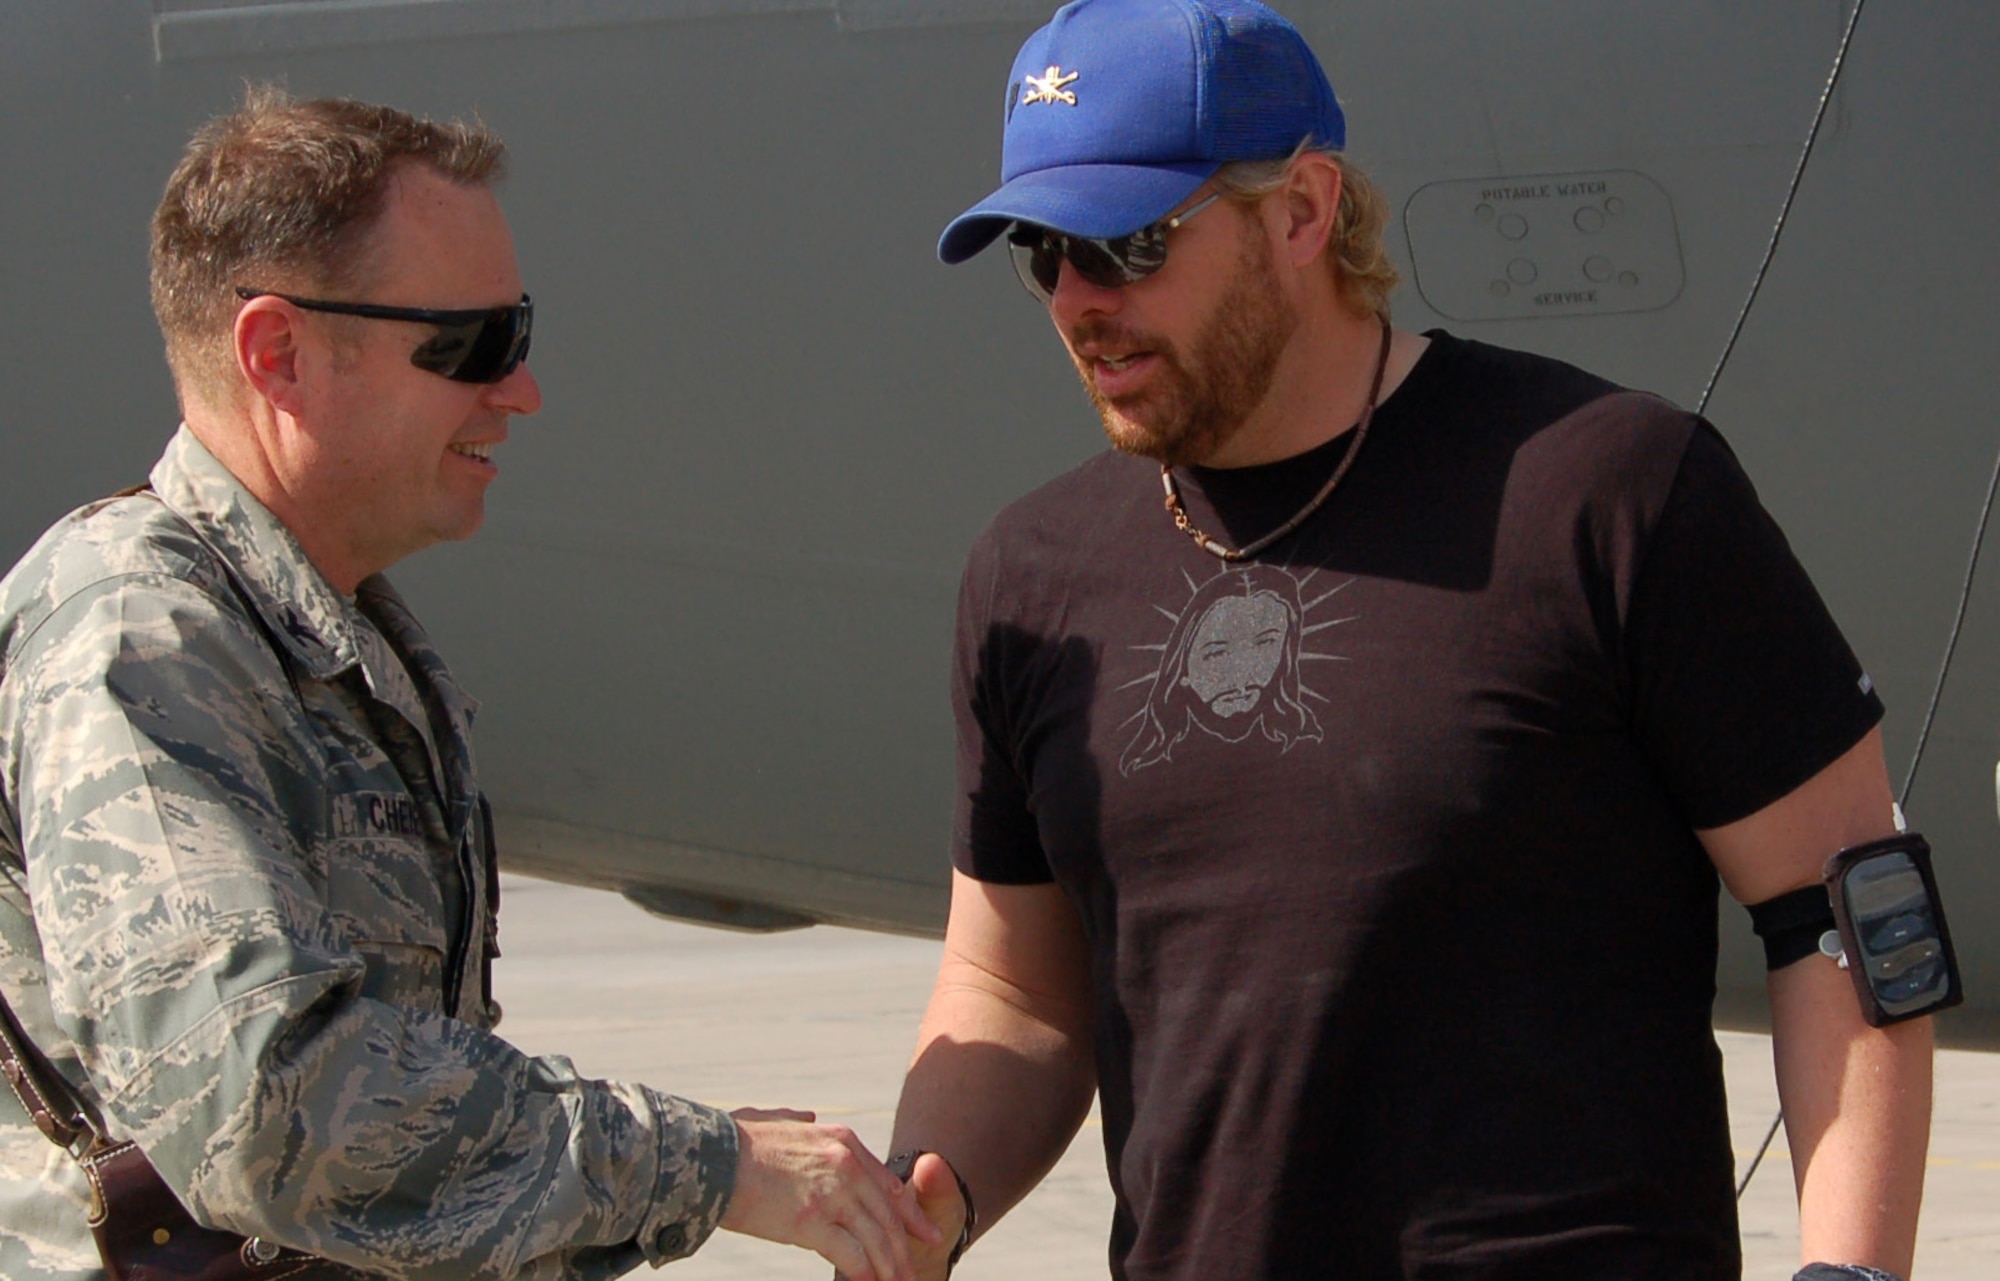 SATHER AIR BASE, Iraq -- Col. Fred Cheney, 447th Air Expeditionary Group commander, greets singer, songwriter Toby Keith as he arrives here on a C-17 Globemaster III from Charleston Air Force Base, S.C., April 25. Toby Keith and his band are in the deployed area of responsibility for their "Biggest and Baddest" tour. (U.S. Air Force photo/Tech. Sgt. Amanda Callahan)